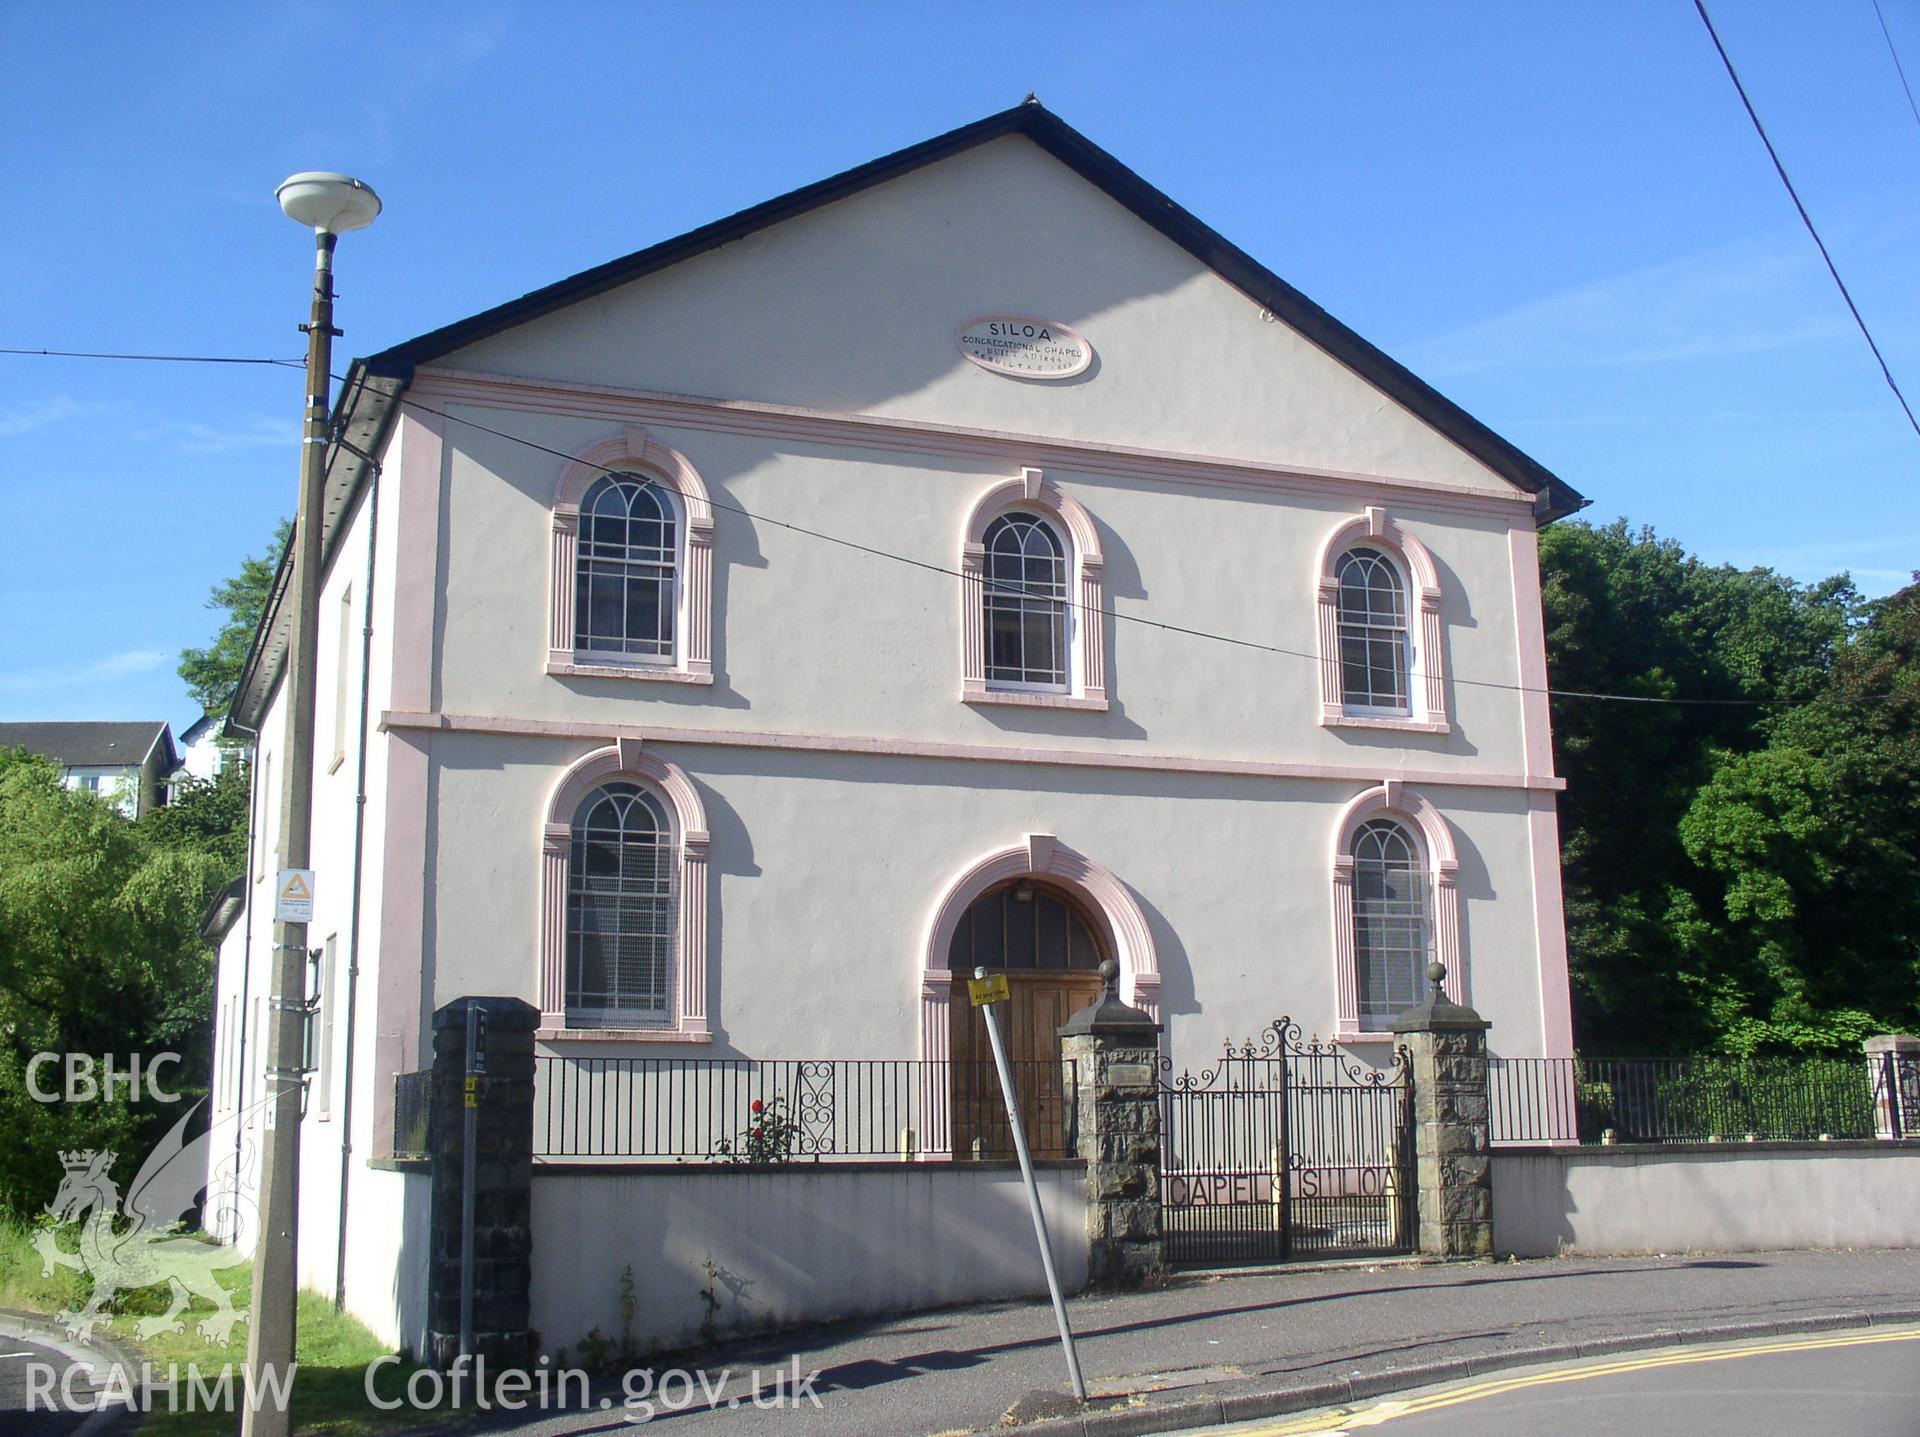 Colour digital photograph showing the front exterior of Siloa Independent Chapel, Aberdare; Glamorgan.